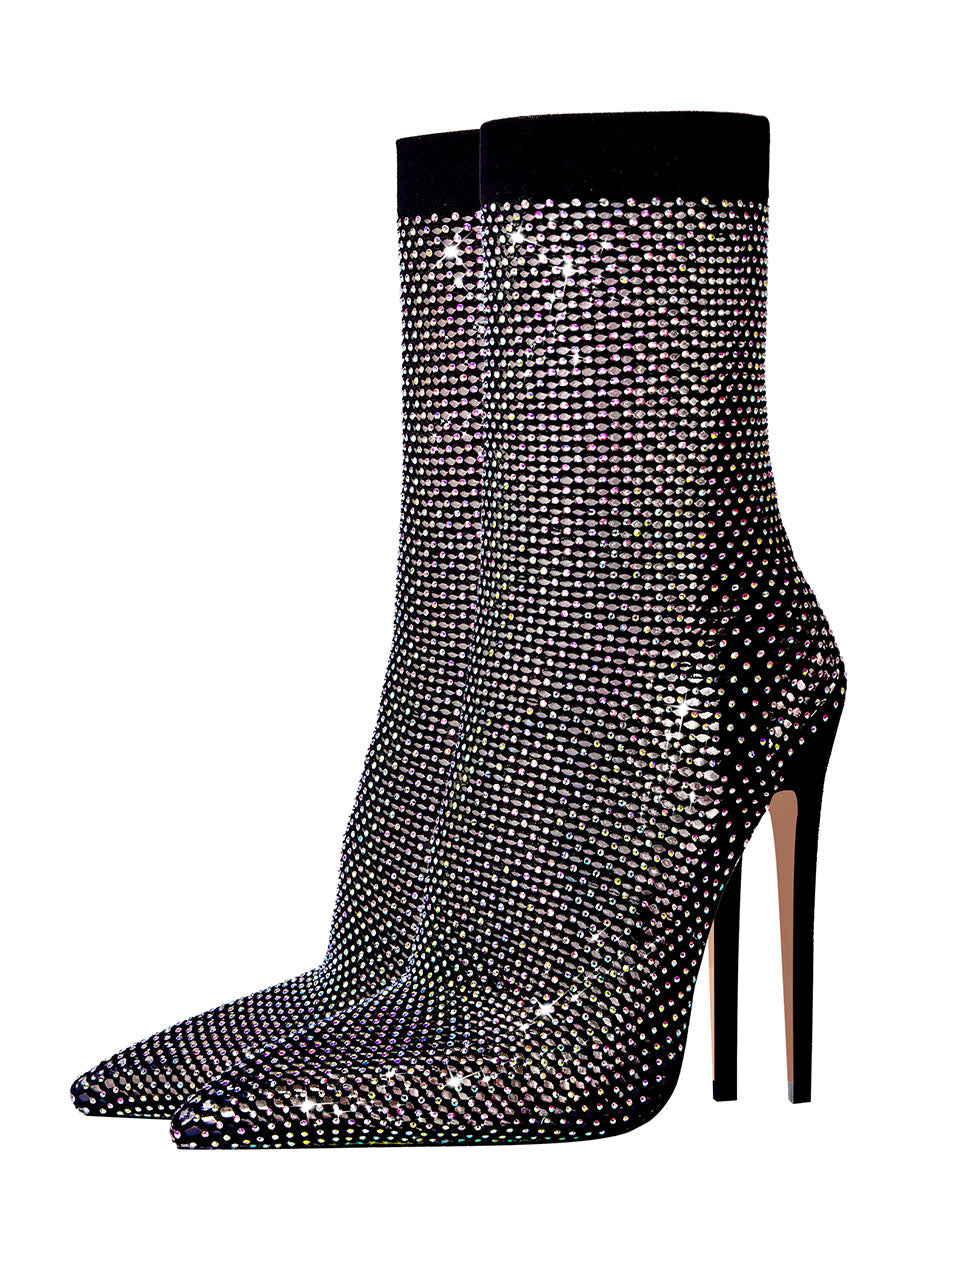 High Heel Pointed Toes Luxury Bling Rhinestone Mesh Sandals Retro Short Boots Shoes